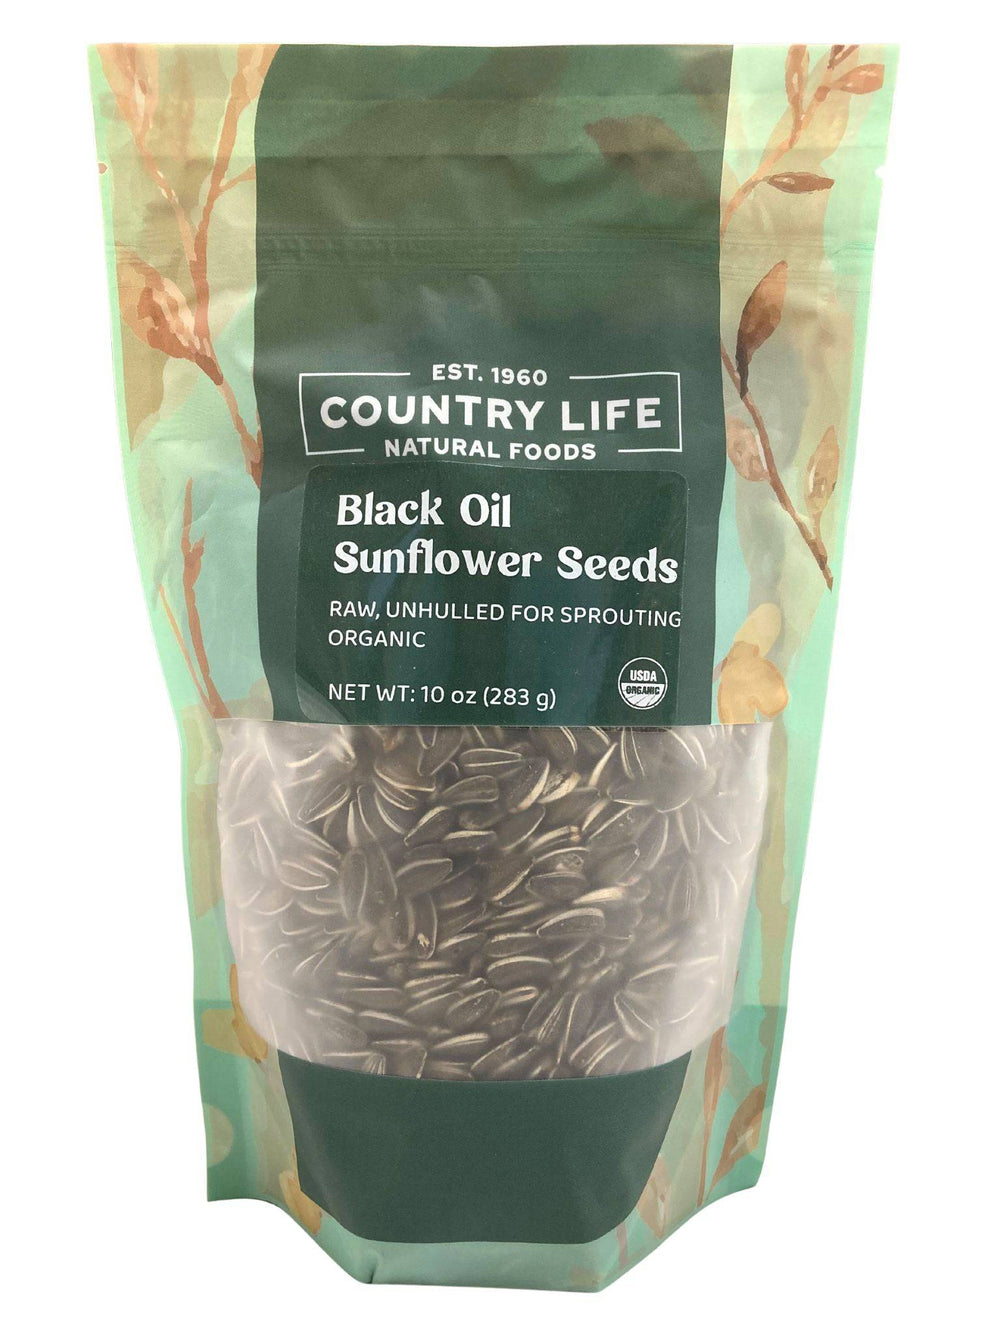 Organic Black Oil Sunflower Seeds, Unhulled (For Sprouting) - Country Life Natural Foods